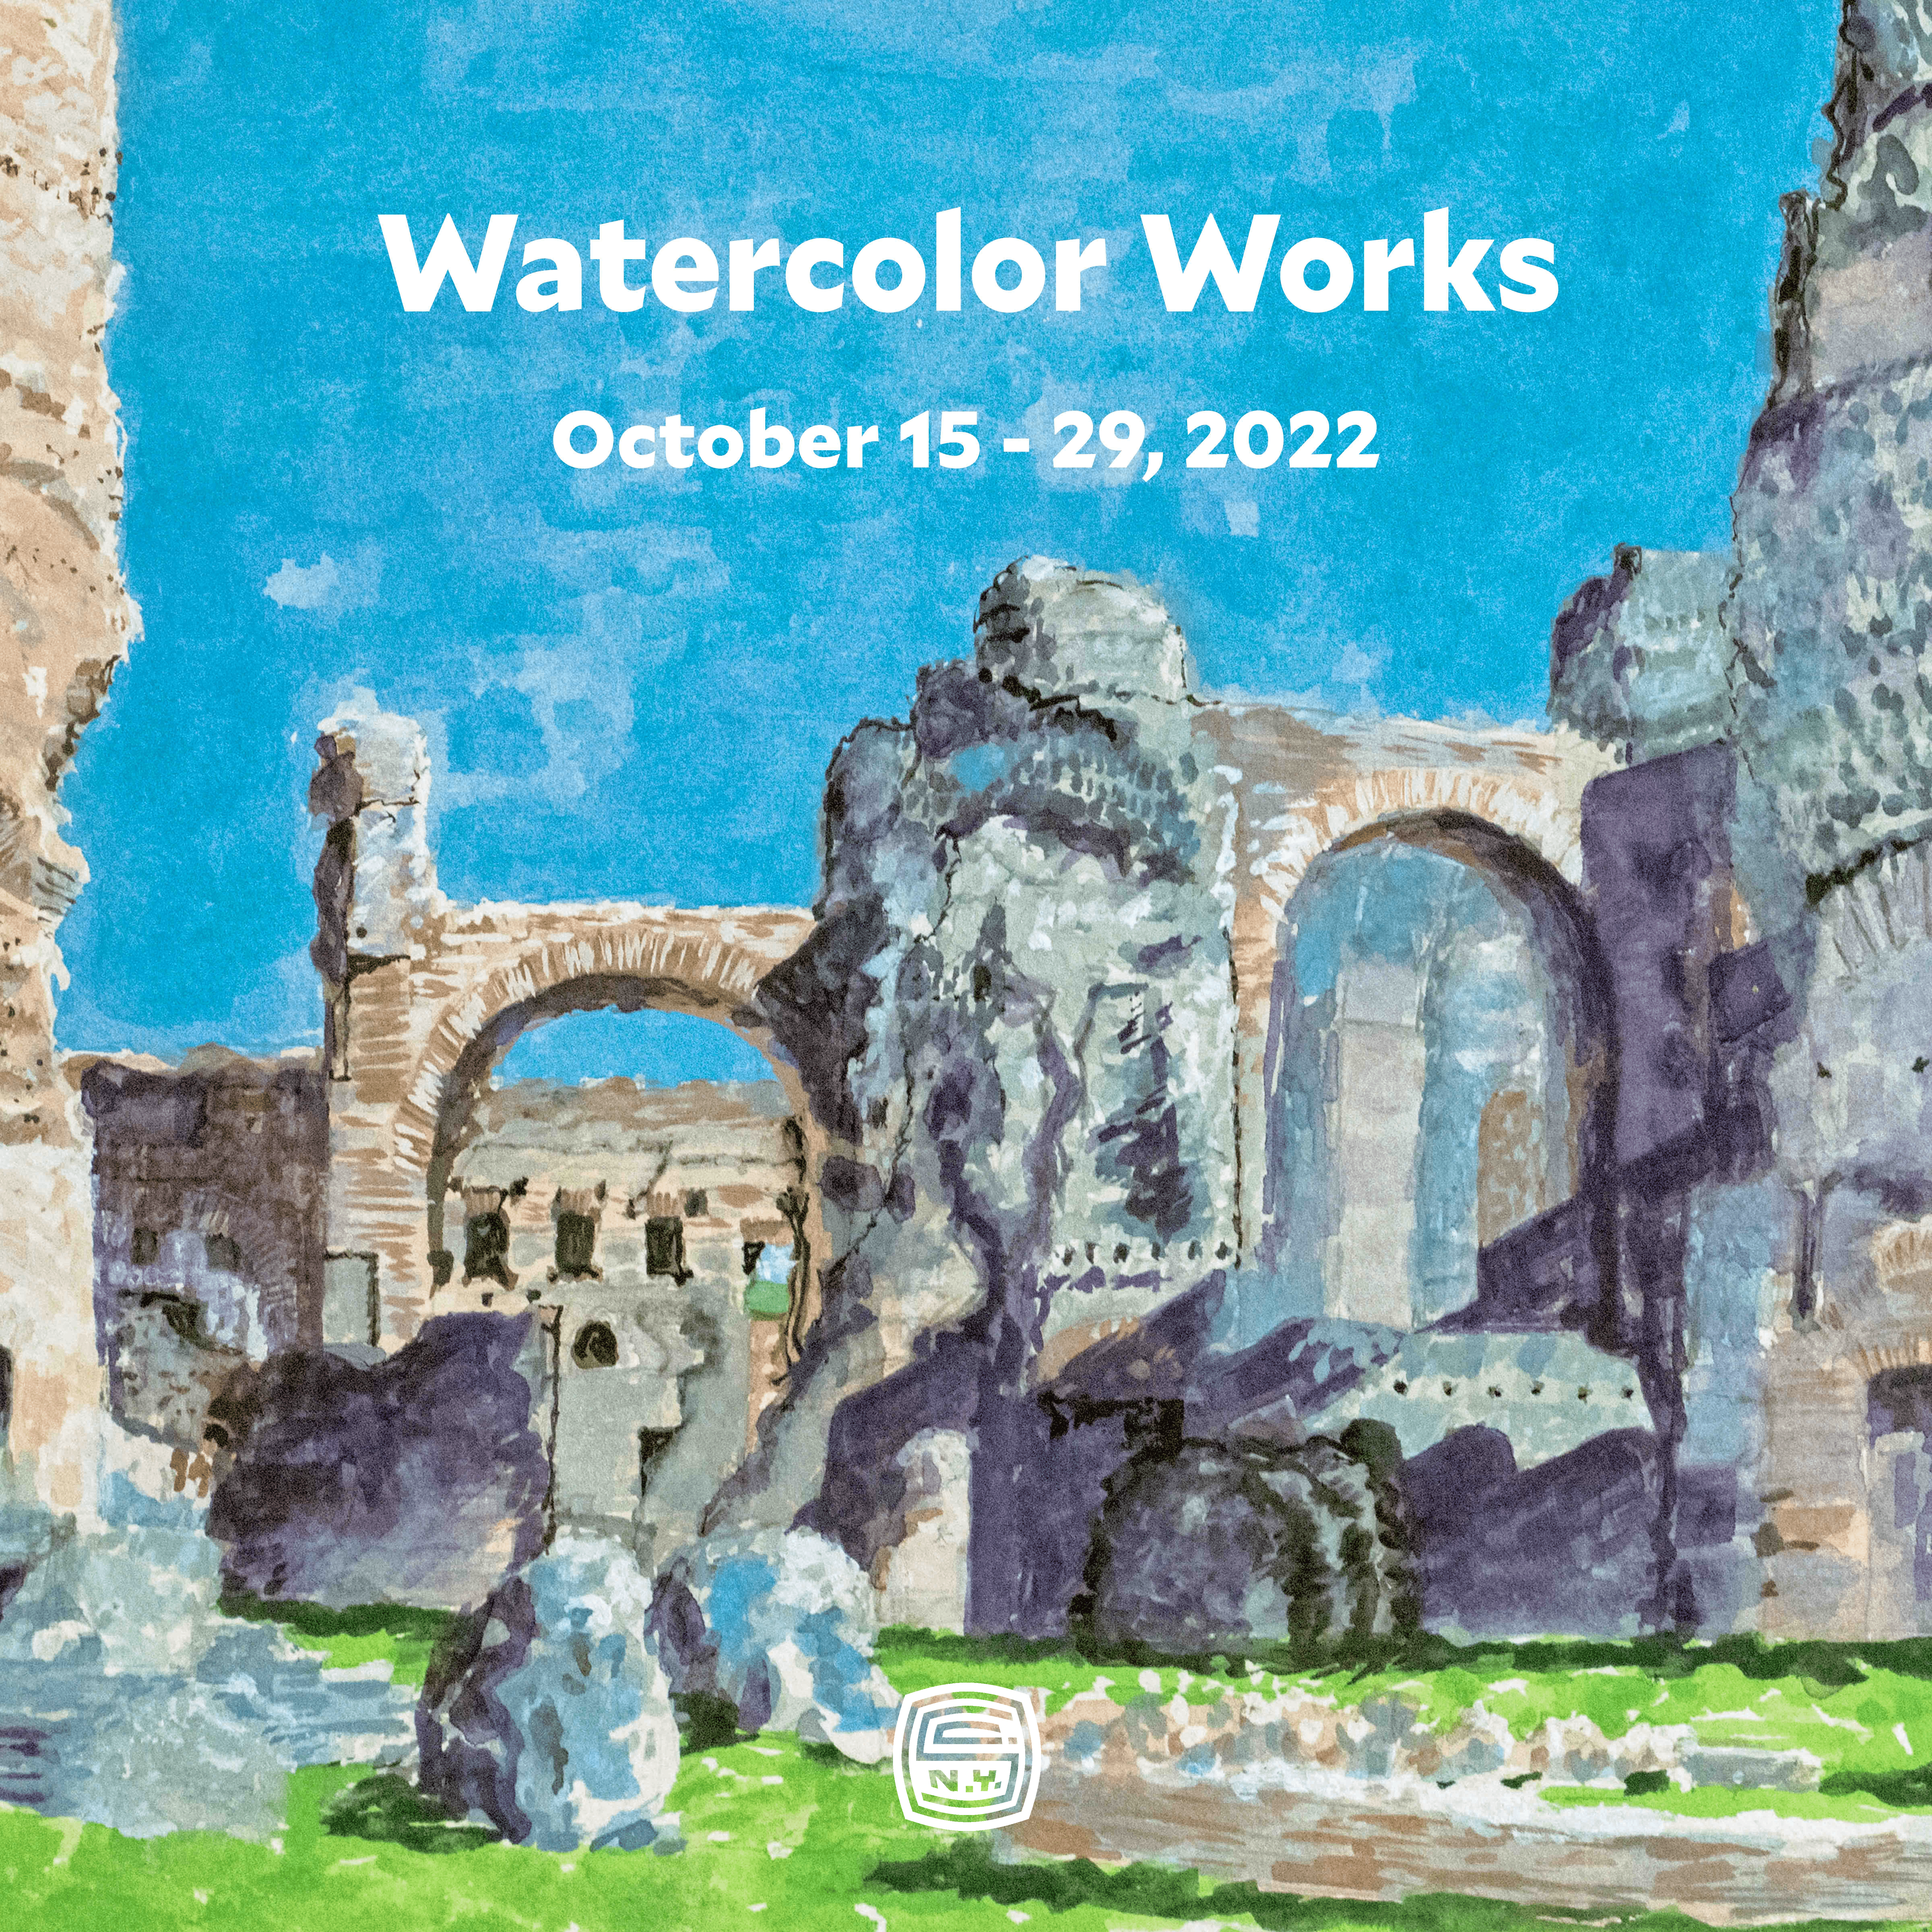 Details for Watercolor Works exhibition.